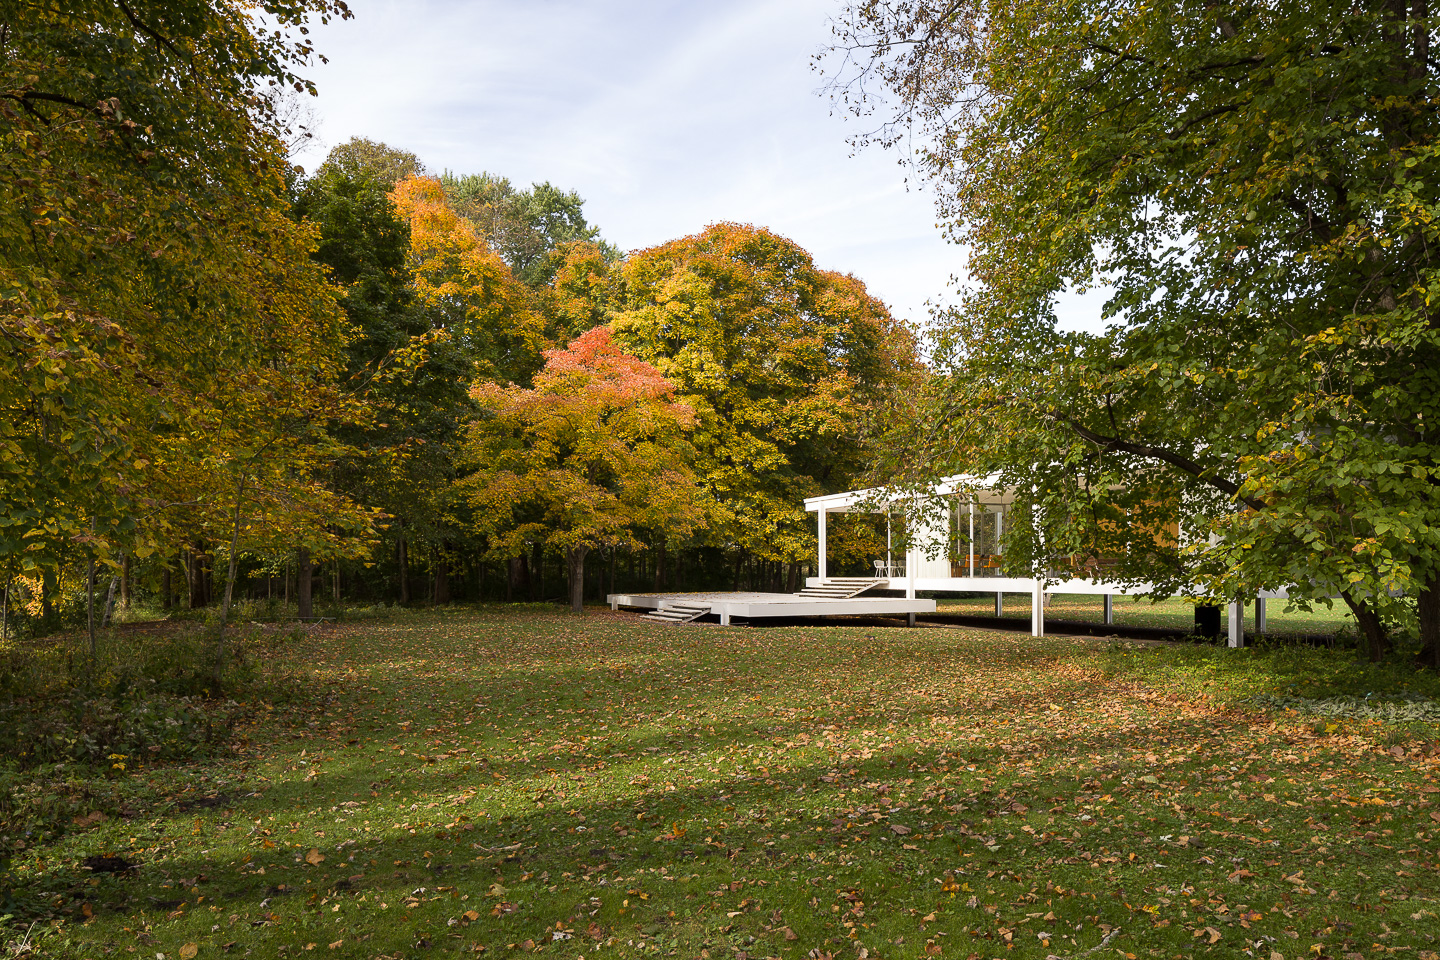 Farnsworth House in Plano, IL by Ludwig Mies van der Rose. Photo by Jason R. Woods.